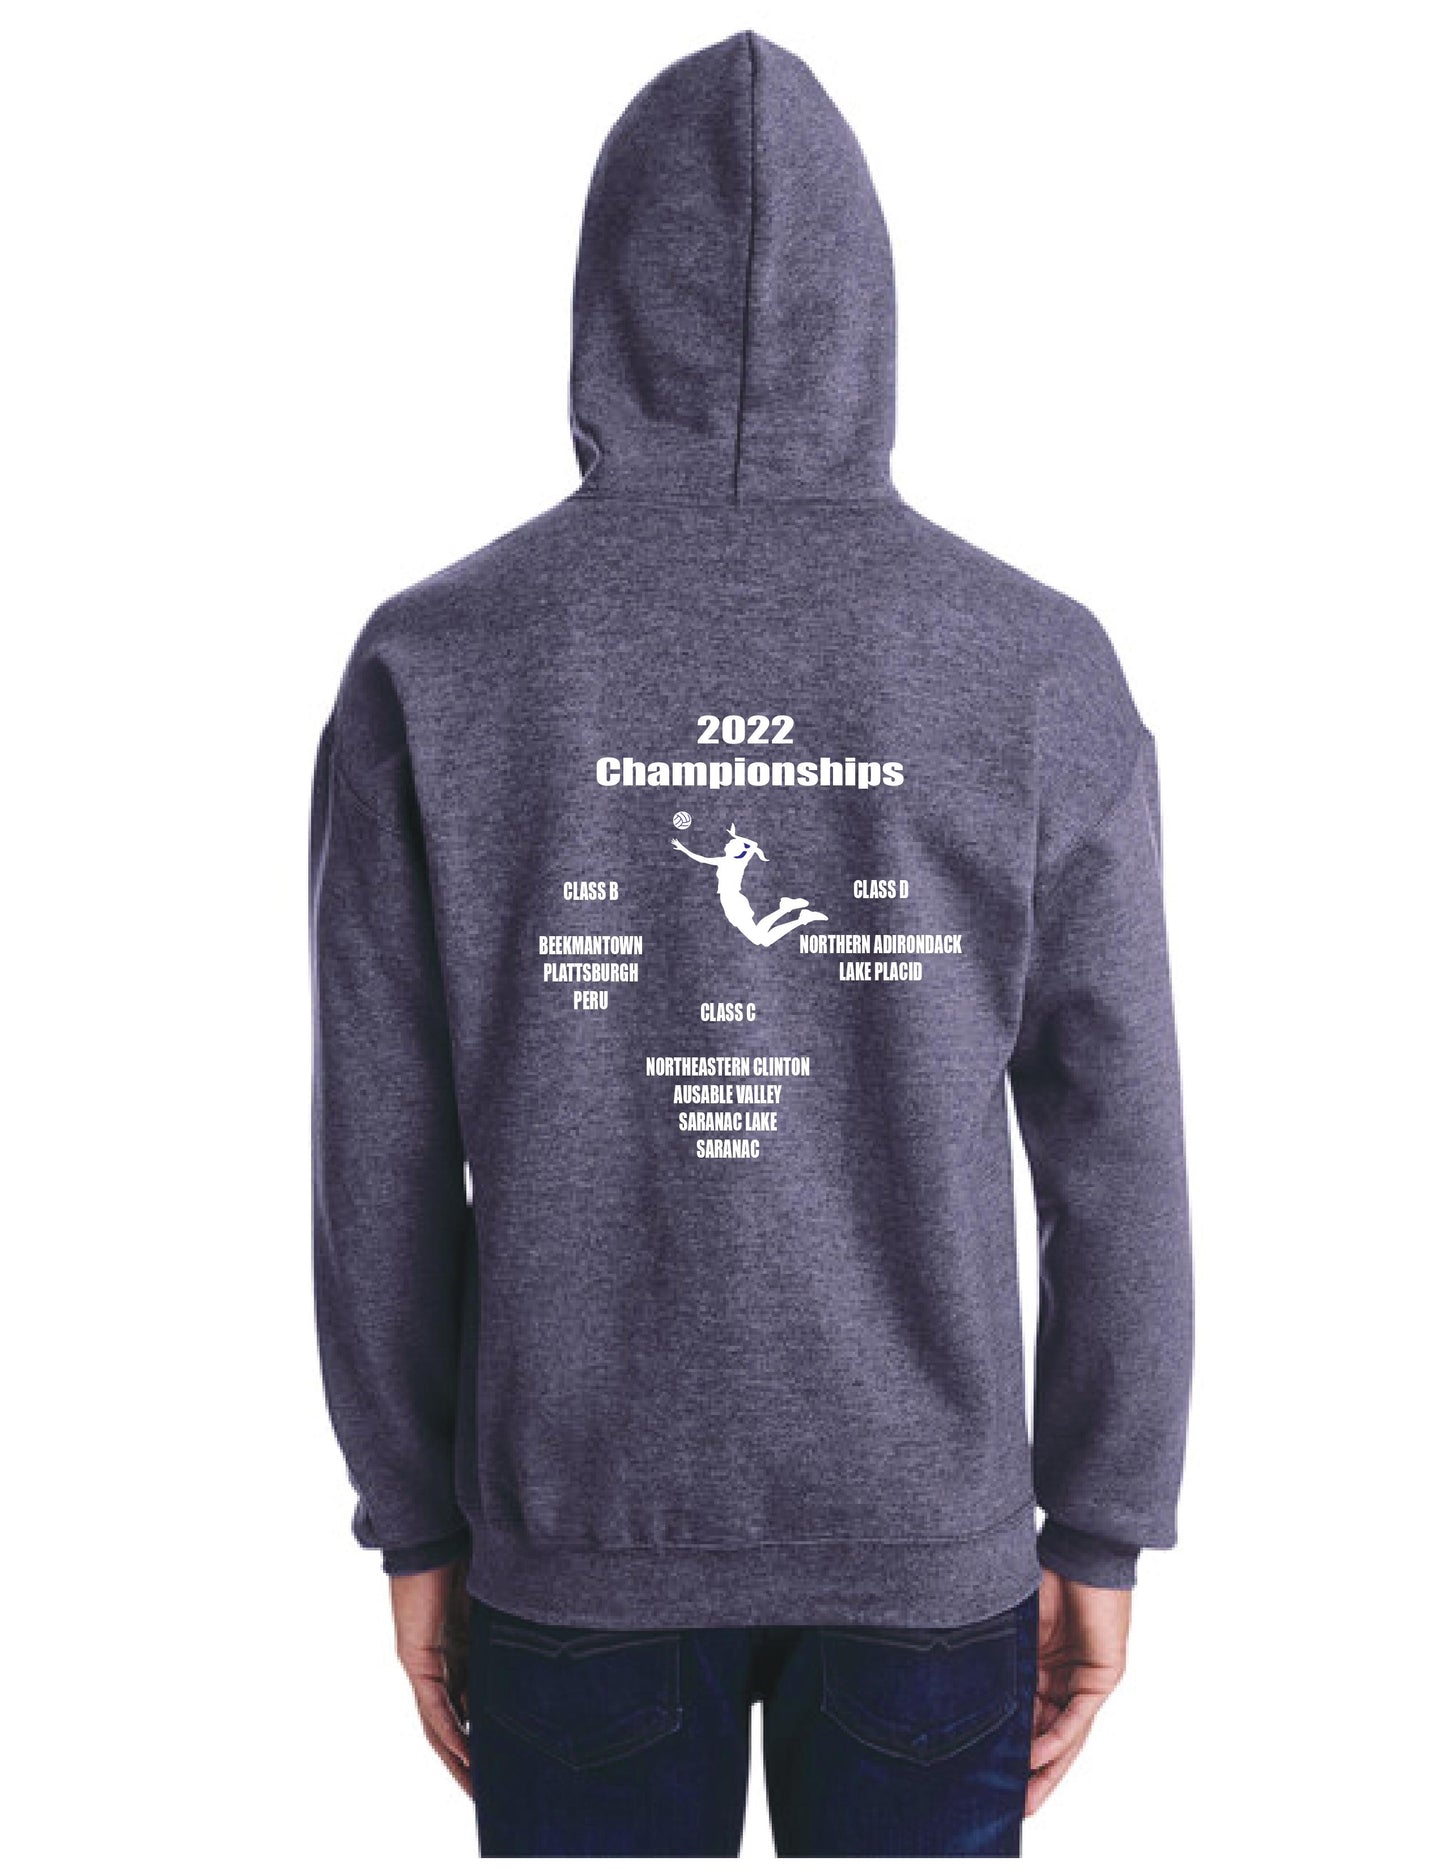 Fall 2022 Championships Volleyball Hoodie